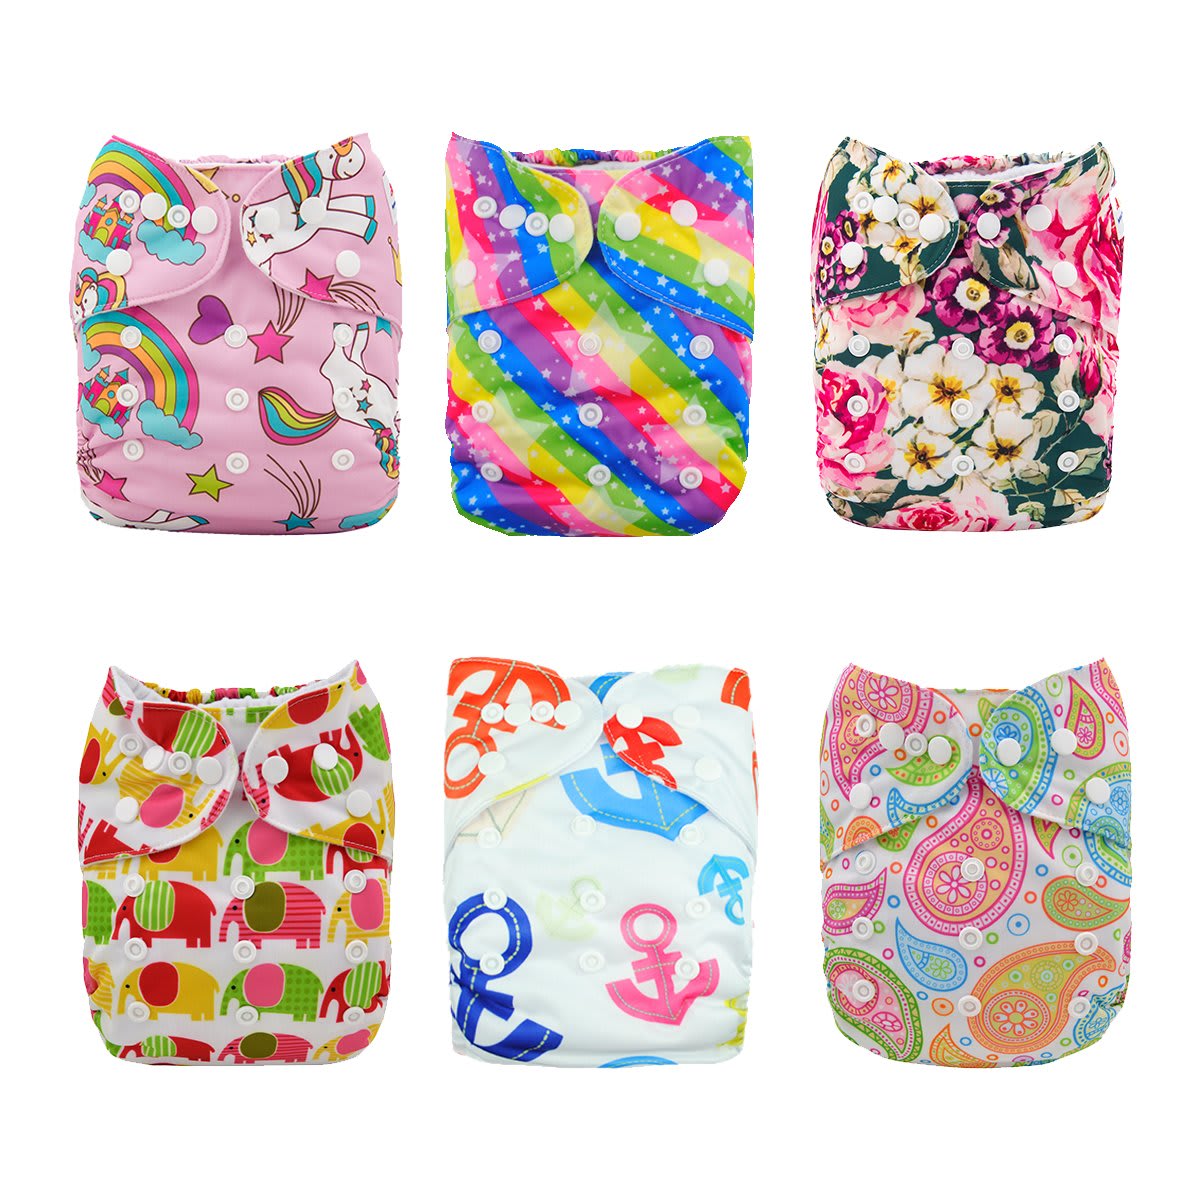 6DM18-DA Baby Cloth Diapers One Size Adjustable Washable Reusable